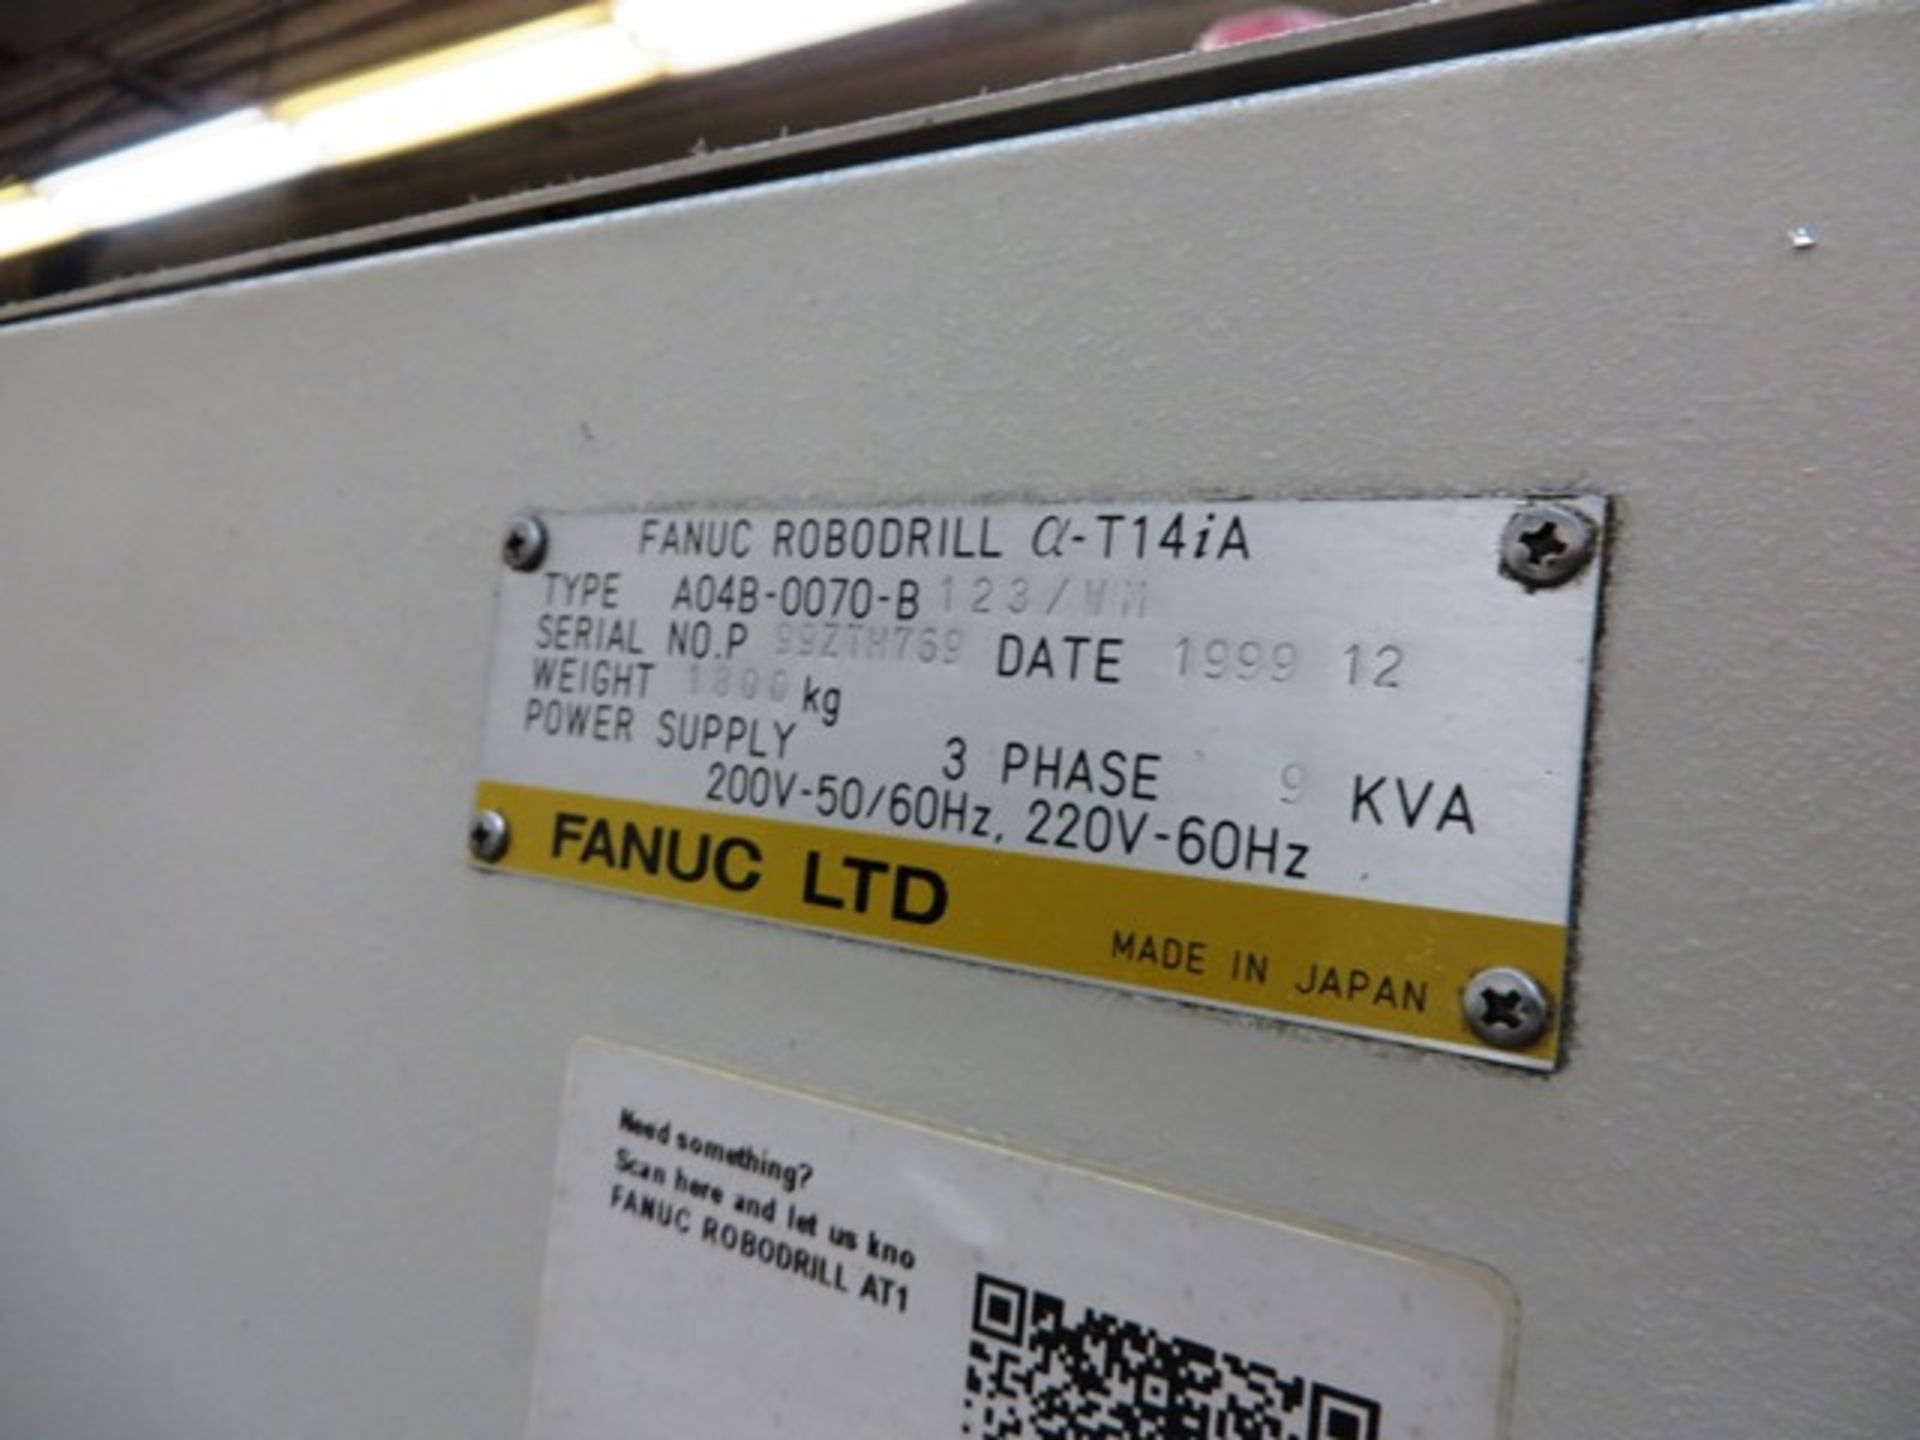 Fanuc Robodrill a-T14iA Dual Pallet CNC Mill, Drill & Tapping Center - Image 7 of 7